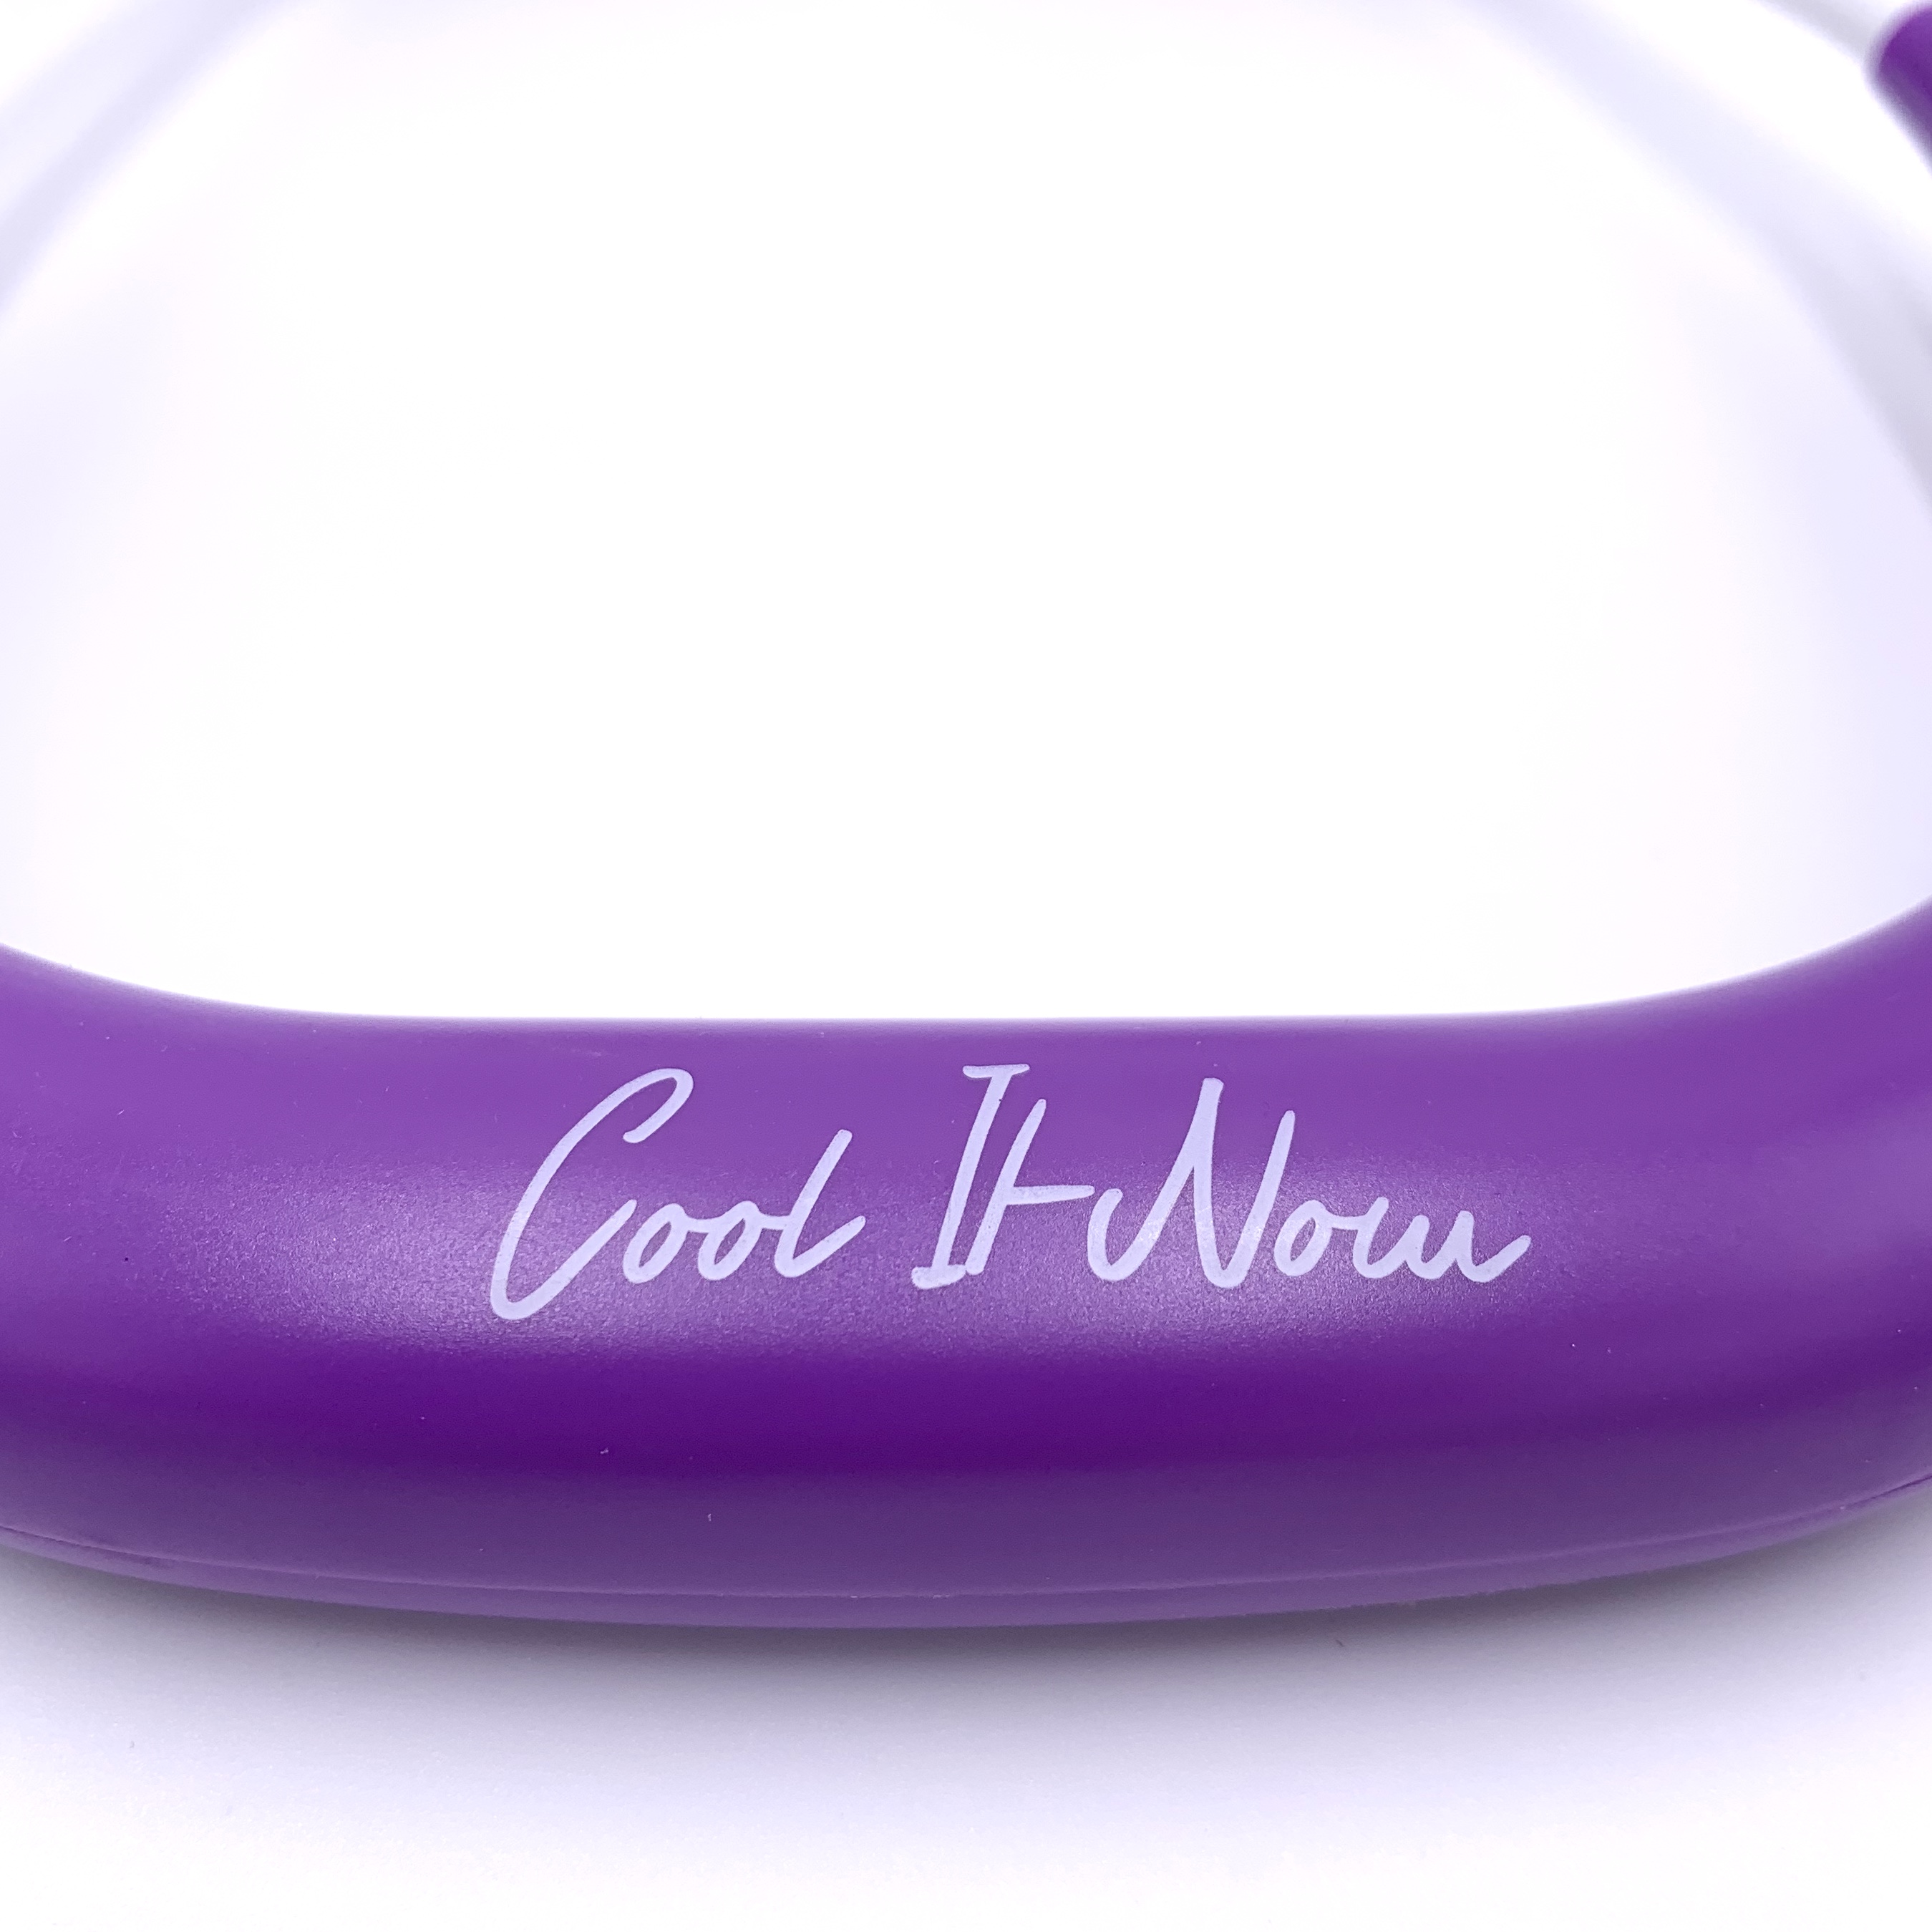 Cool It Now Neck Fan Close-Up for Brown Sugar Box June 2020